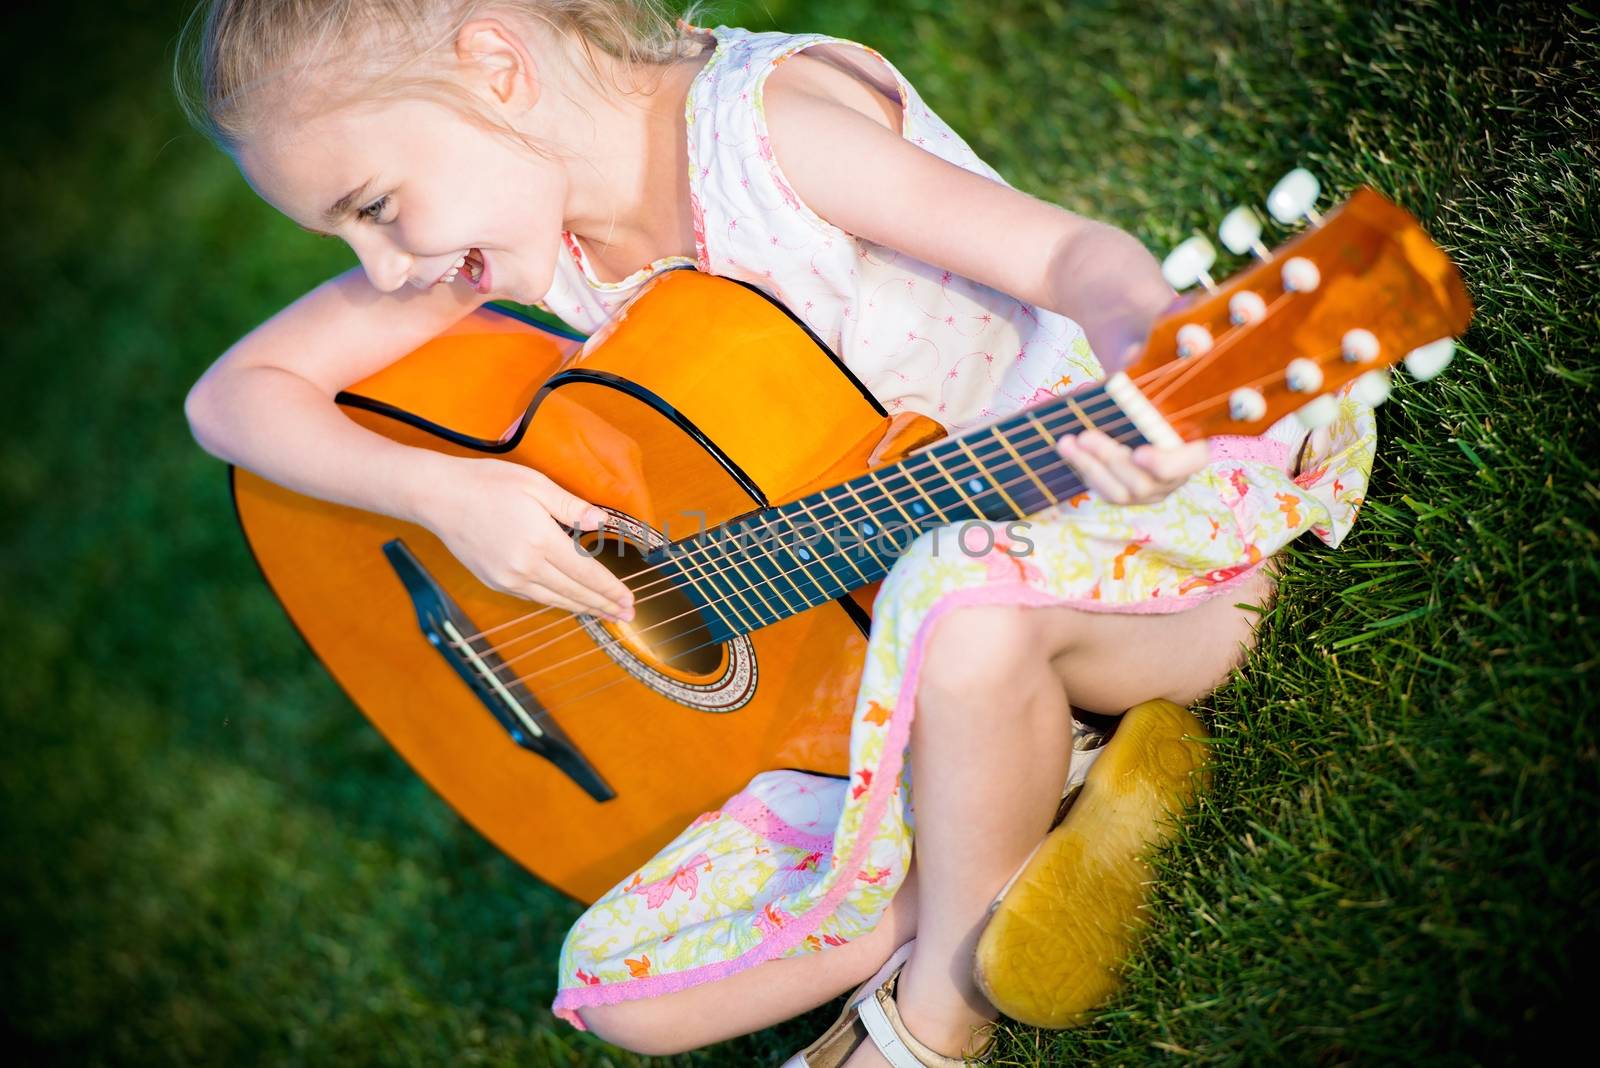 Little Guitar Player. Seven Years Old Girl Playing Guitar and Singing Some Song.